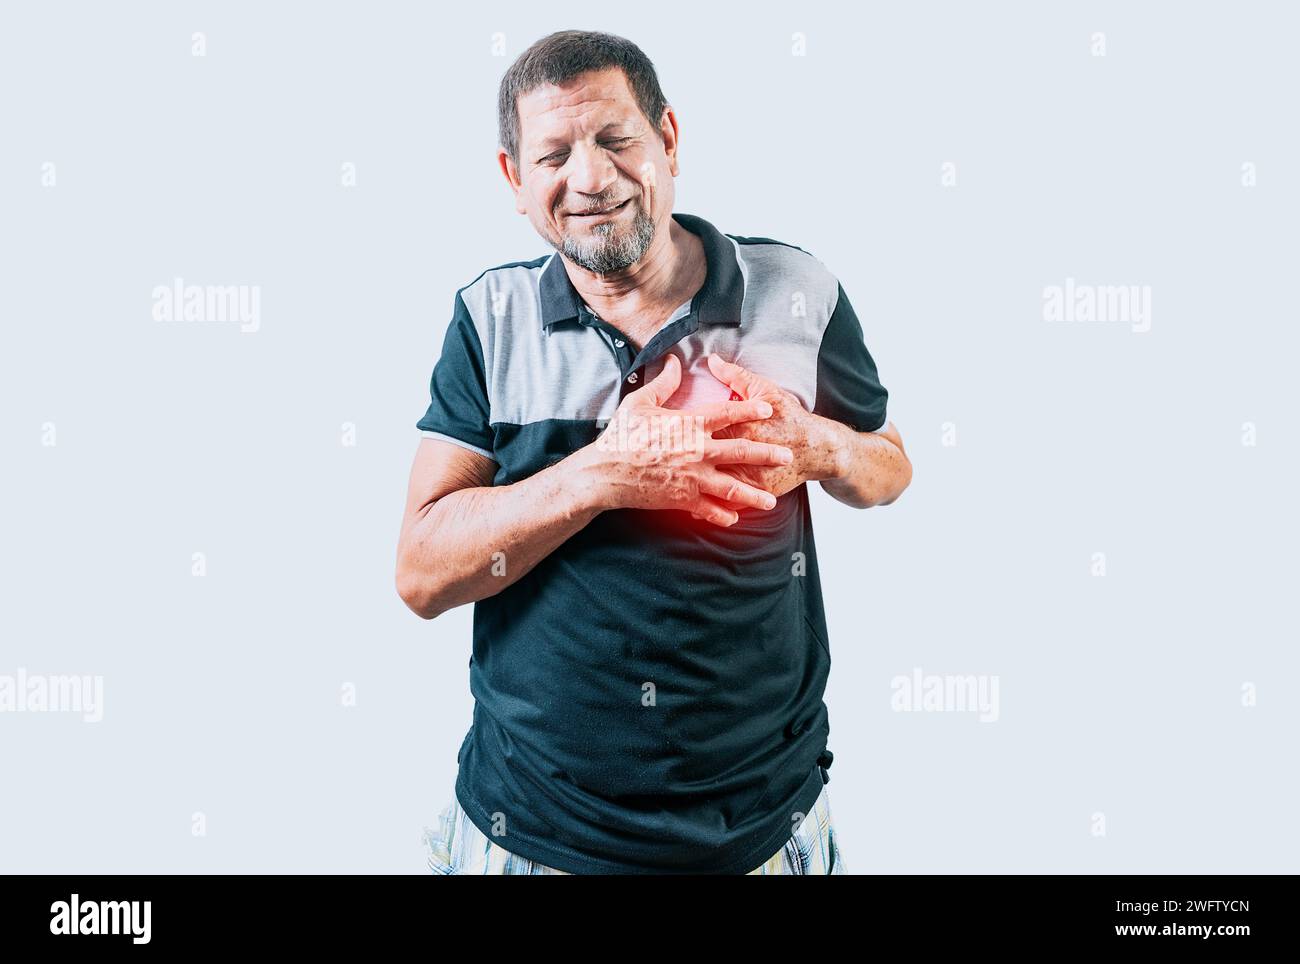 Elderly person with heart problems. Senior man with tachycardia touching his chest. Old man with heart pain touching chest isolated Stock Photo